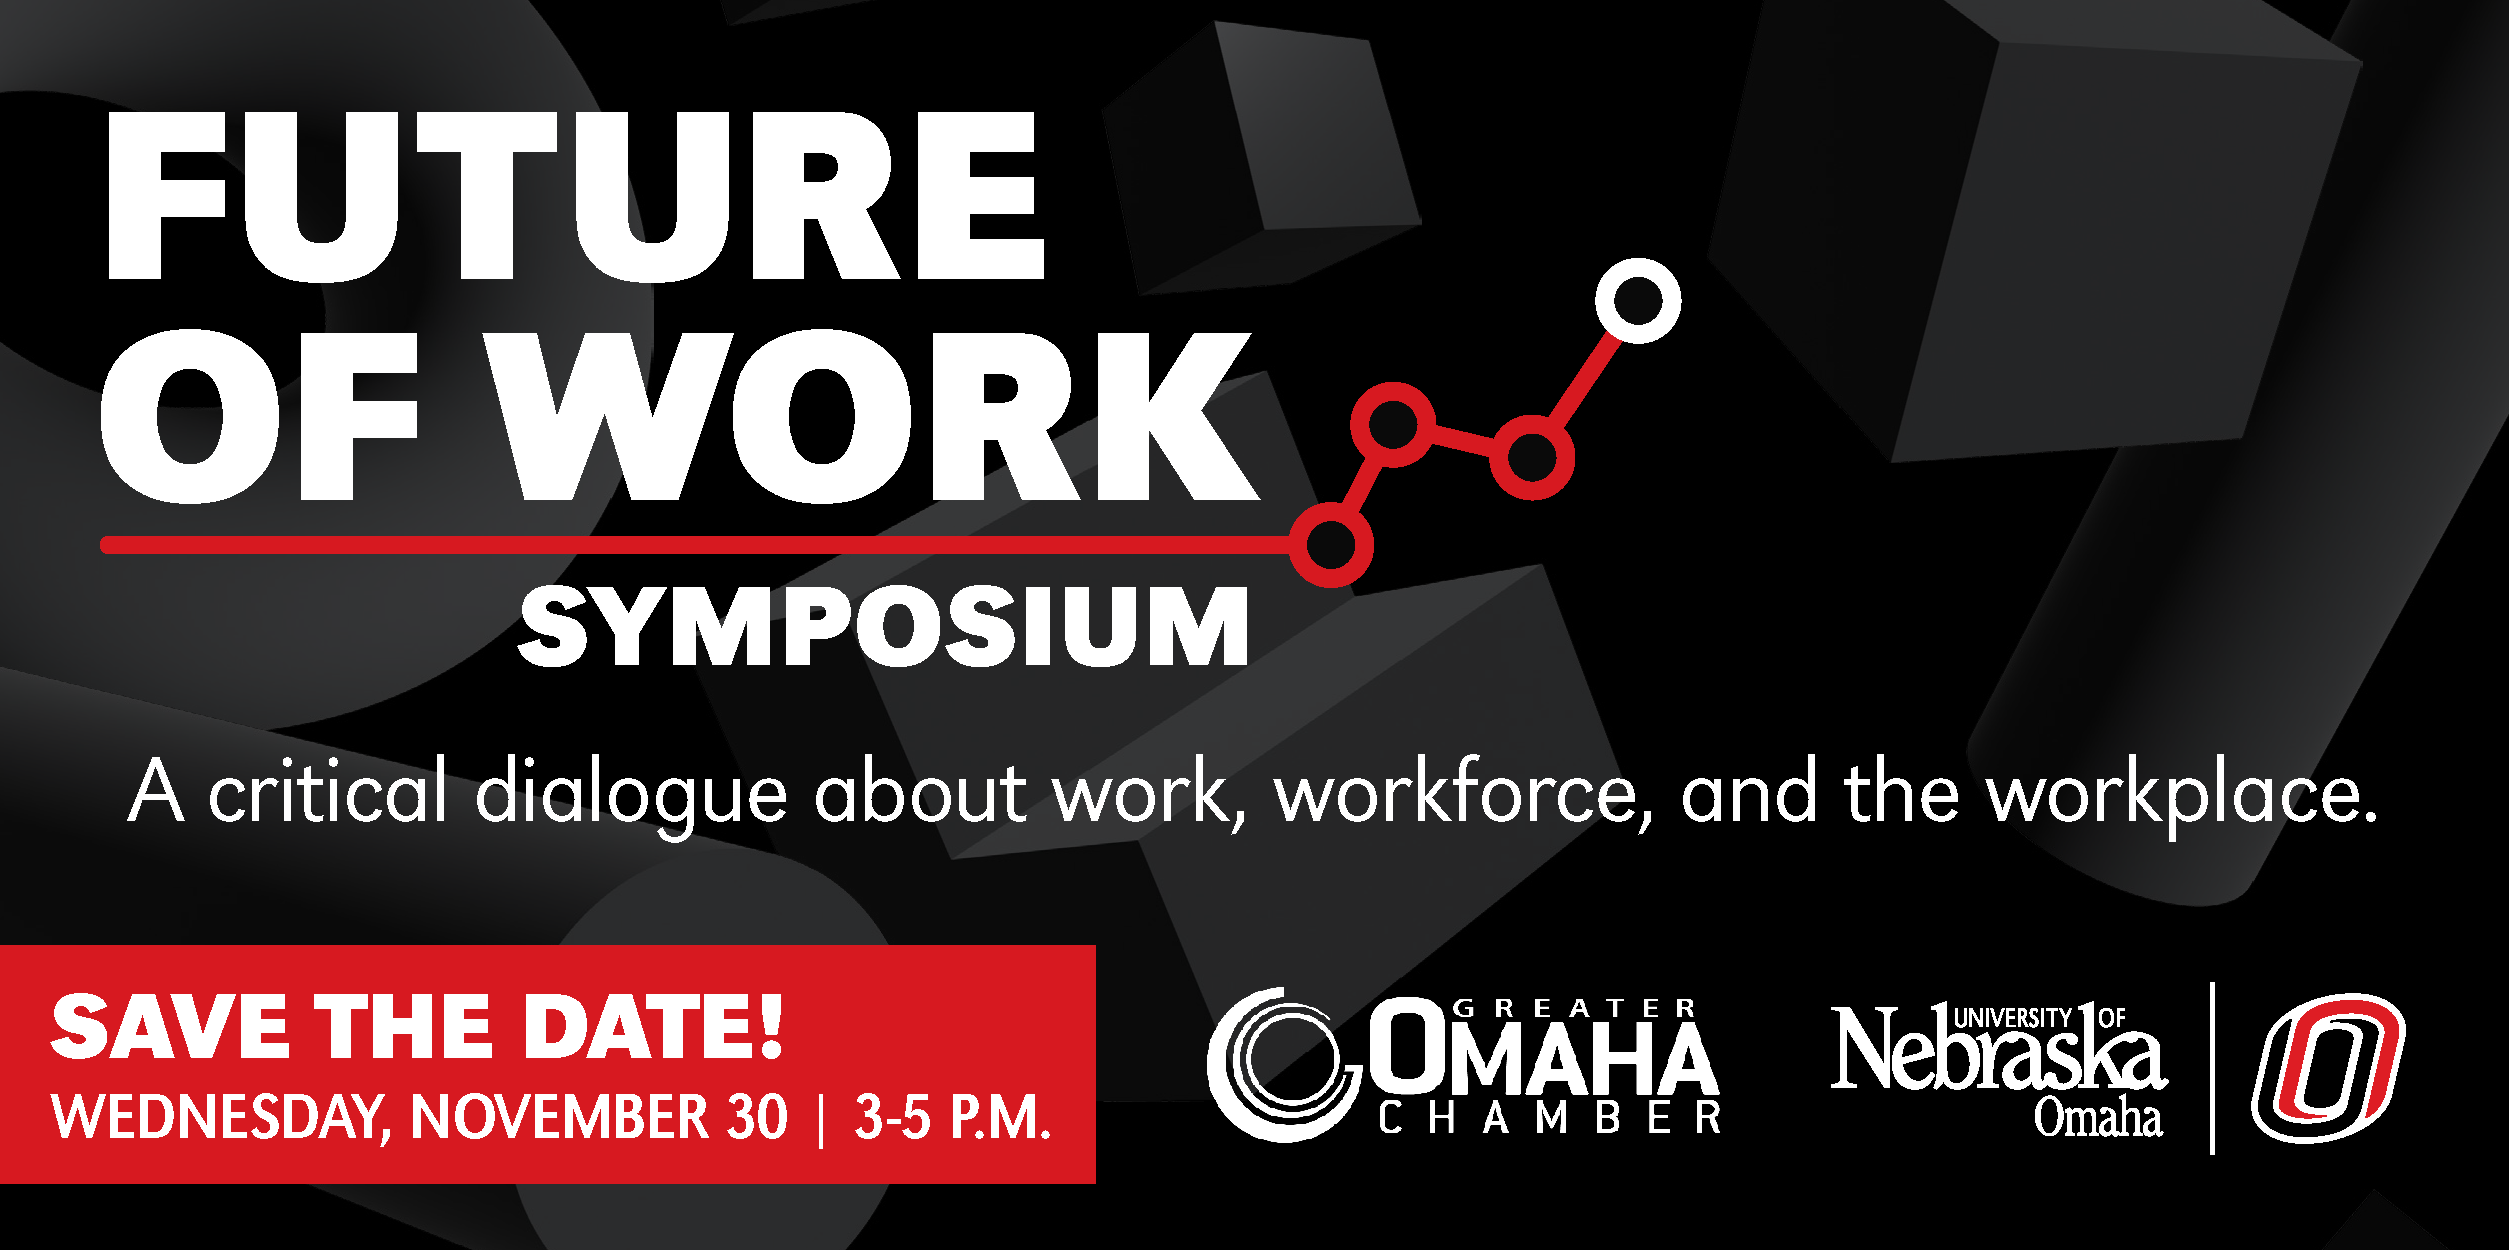 Future of Work Symposium - A critical dialogue about work, workforce, and the workplace. The symposium will take place on November 30th, 2022 from 3-5 P.M.